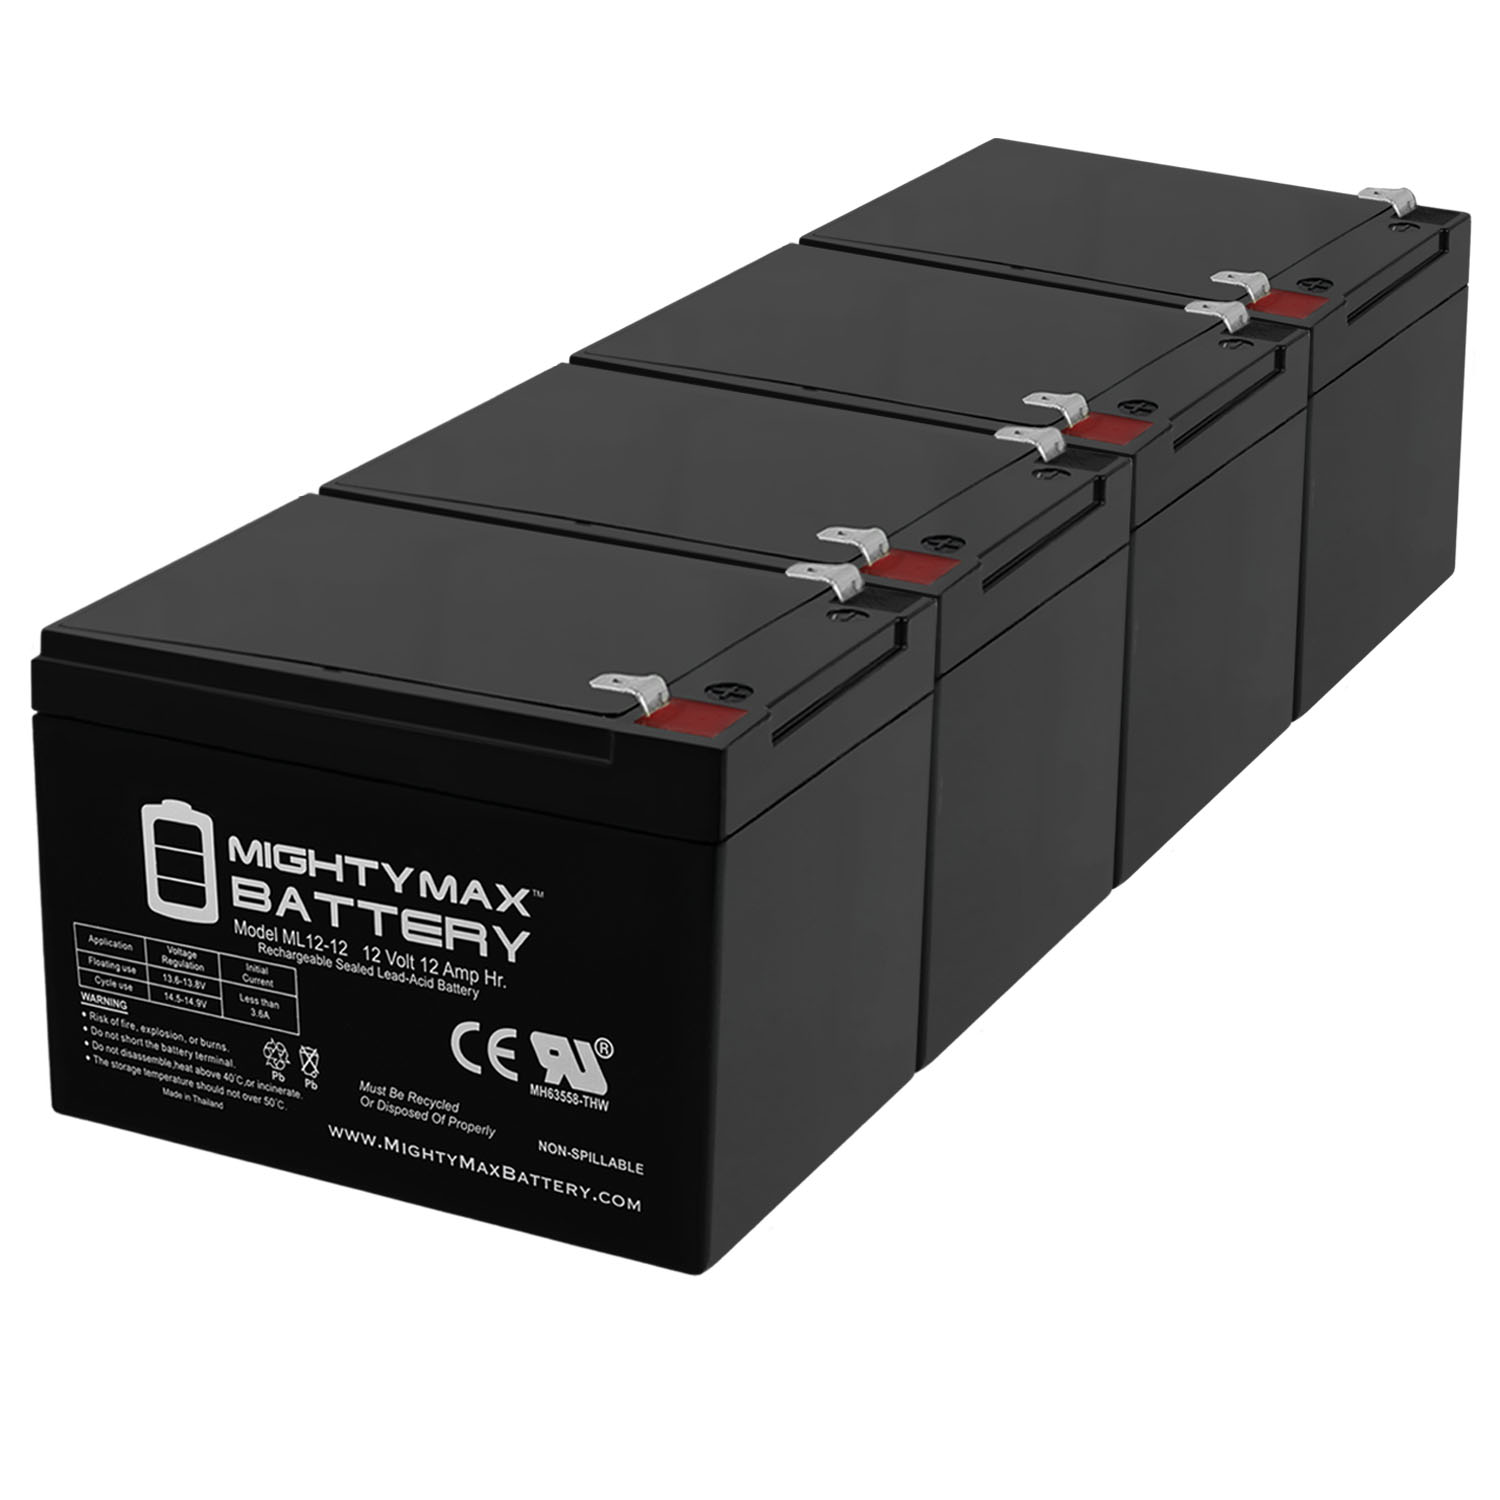 ML12-12 - 12V 12AH F2 Battery Replaces Universal Power Group 85957 UB12120FR - 4 Pack - image 1 of 6